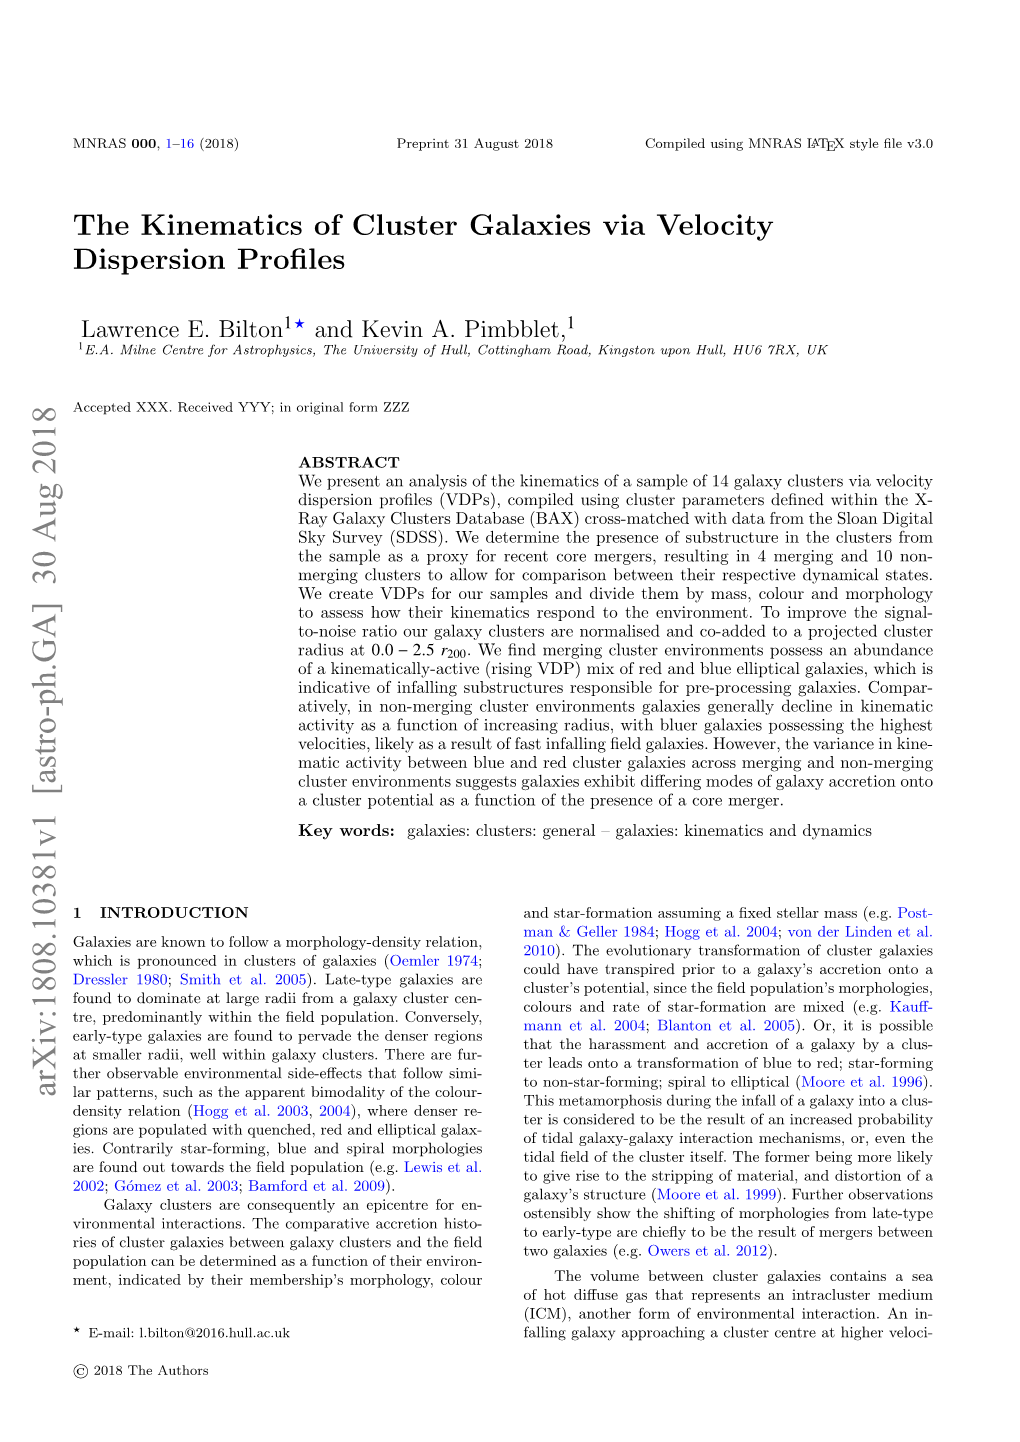 The Kinematics of Cluster Galaxies Via Velocity Dispersion Profiles